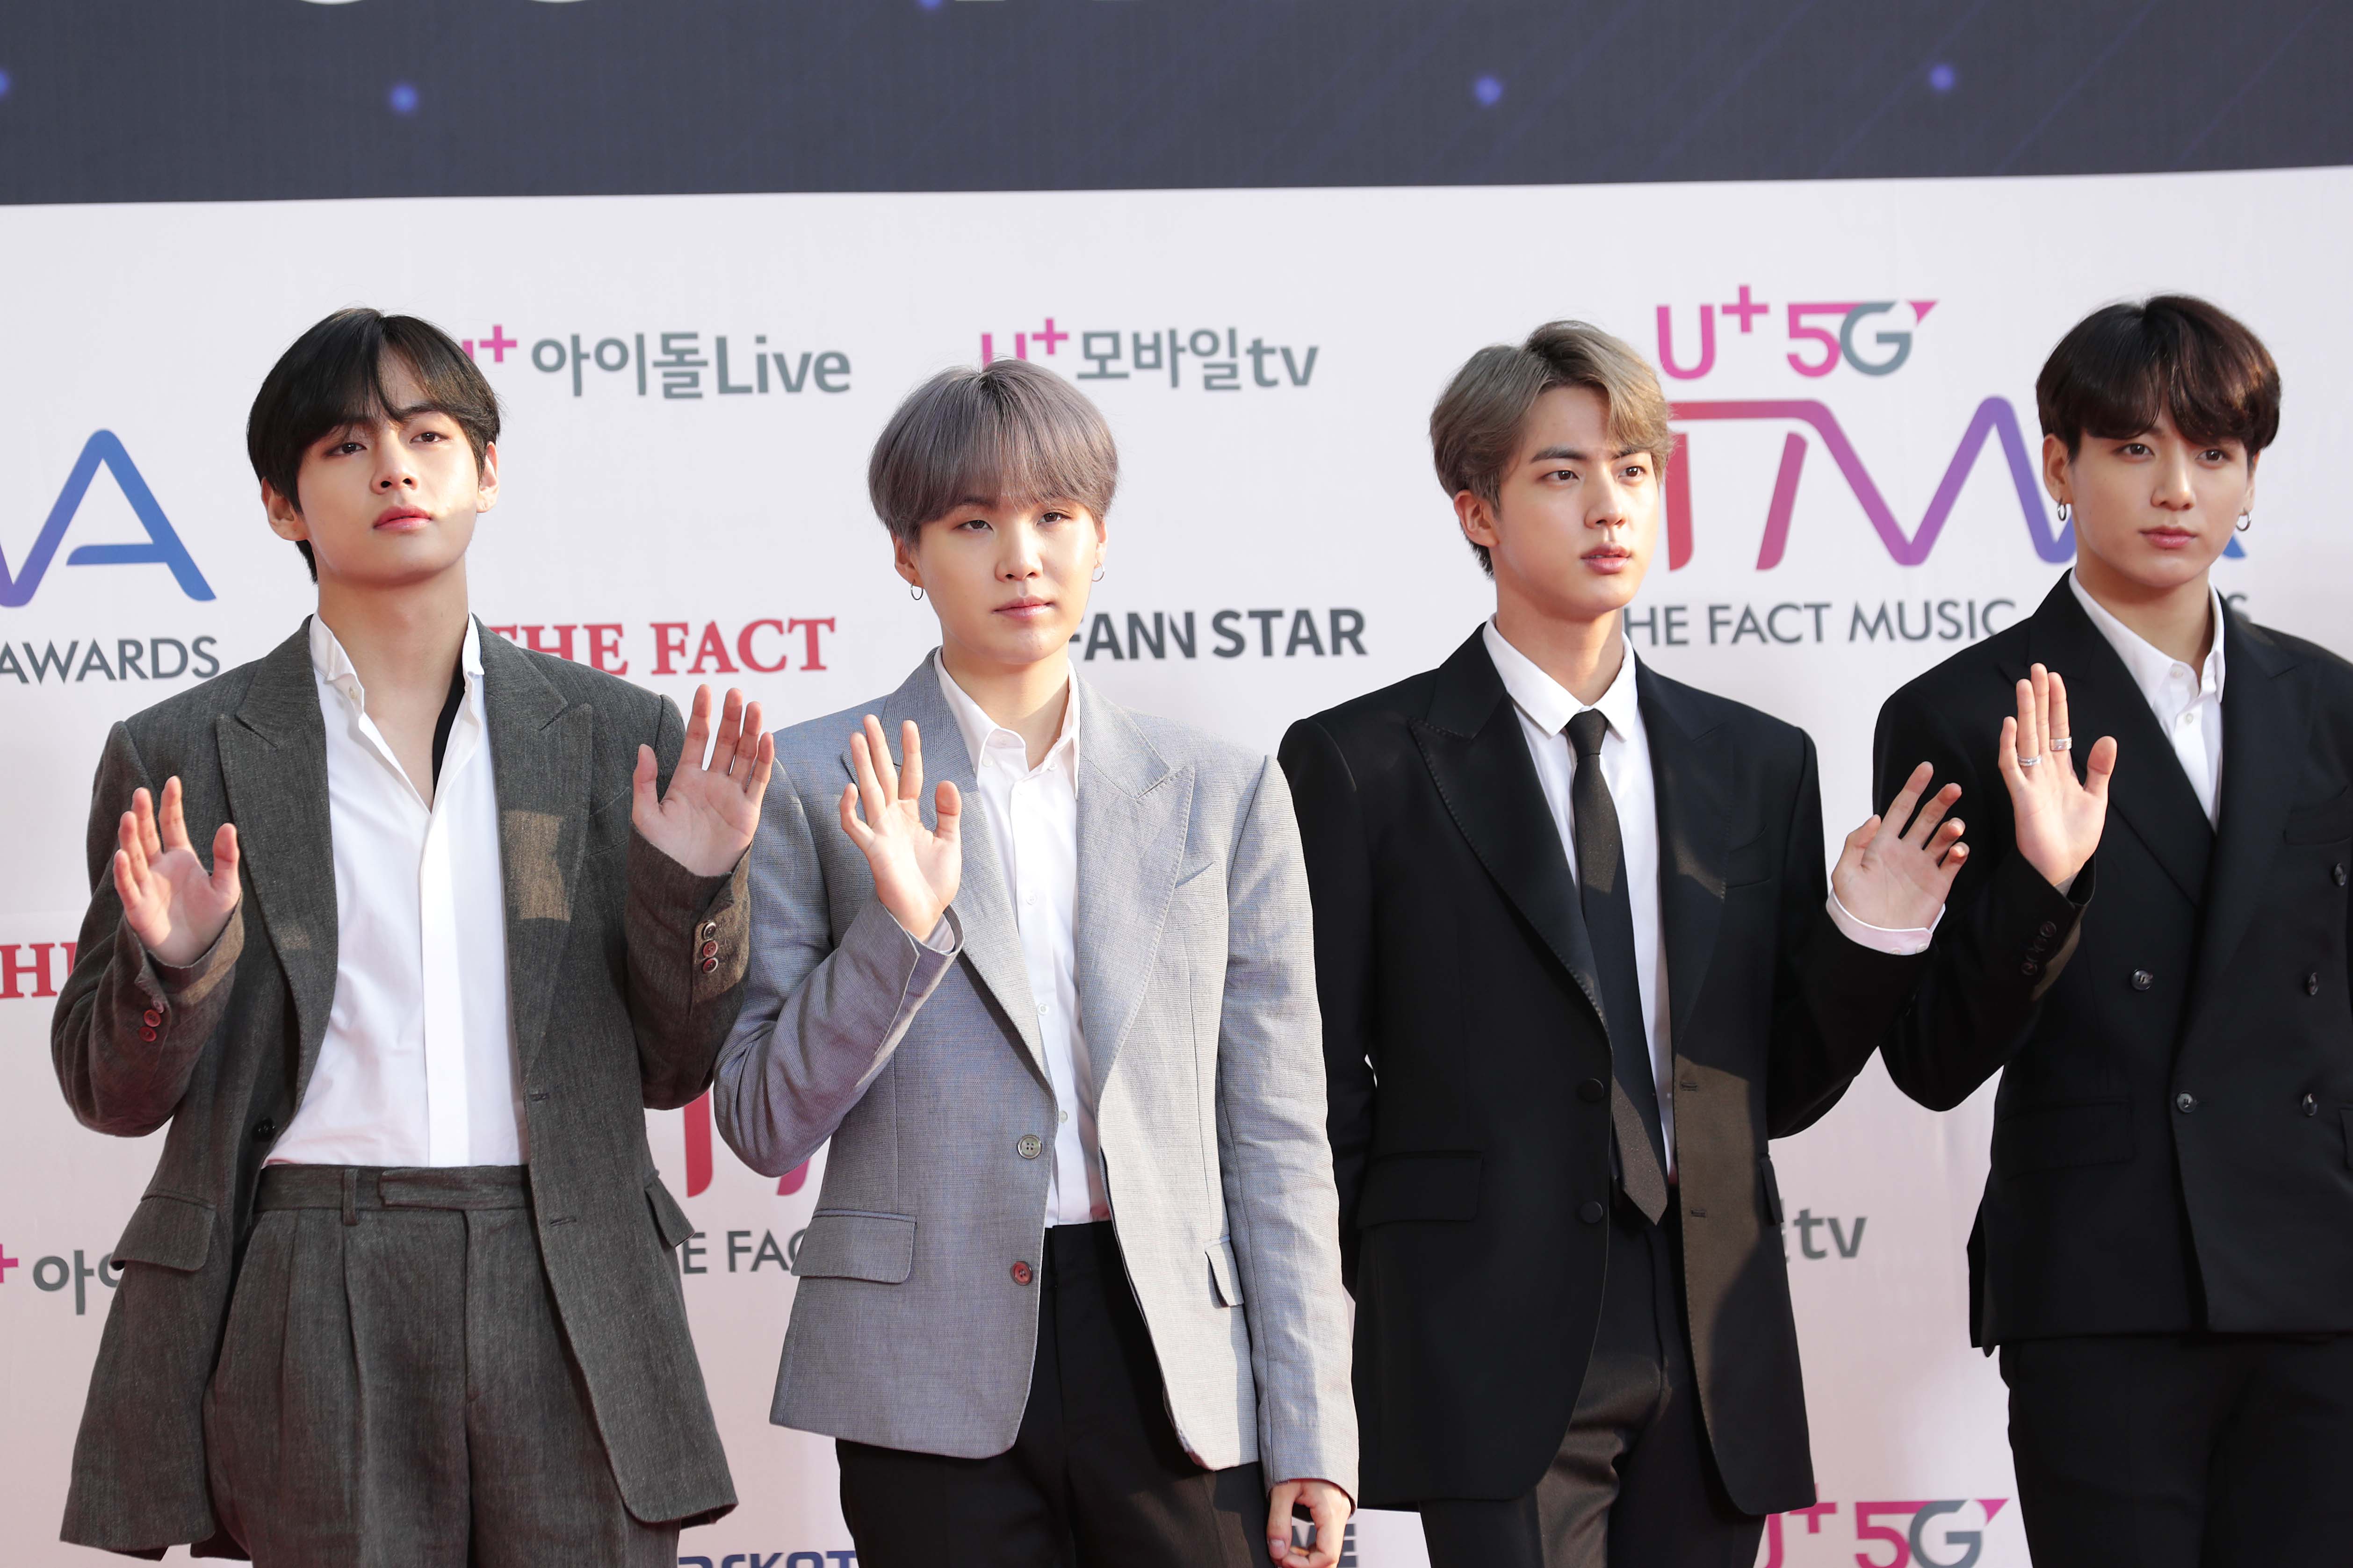 Suga, Jin, and JungKook of boy band BTS attend the photocall for U Plus 5G 'The Fact Music Awards'